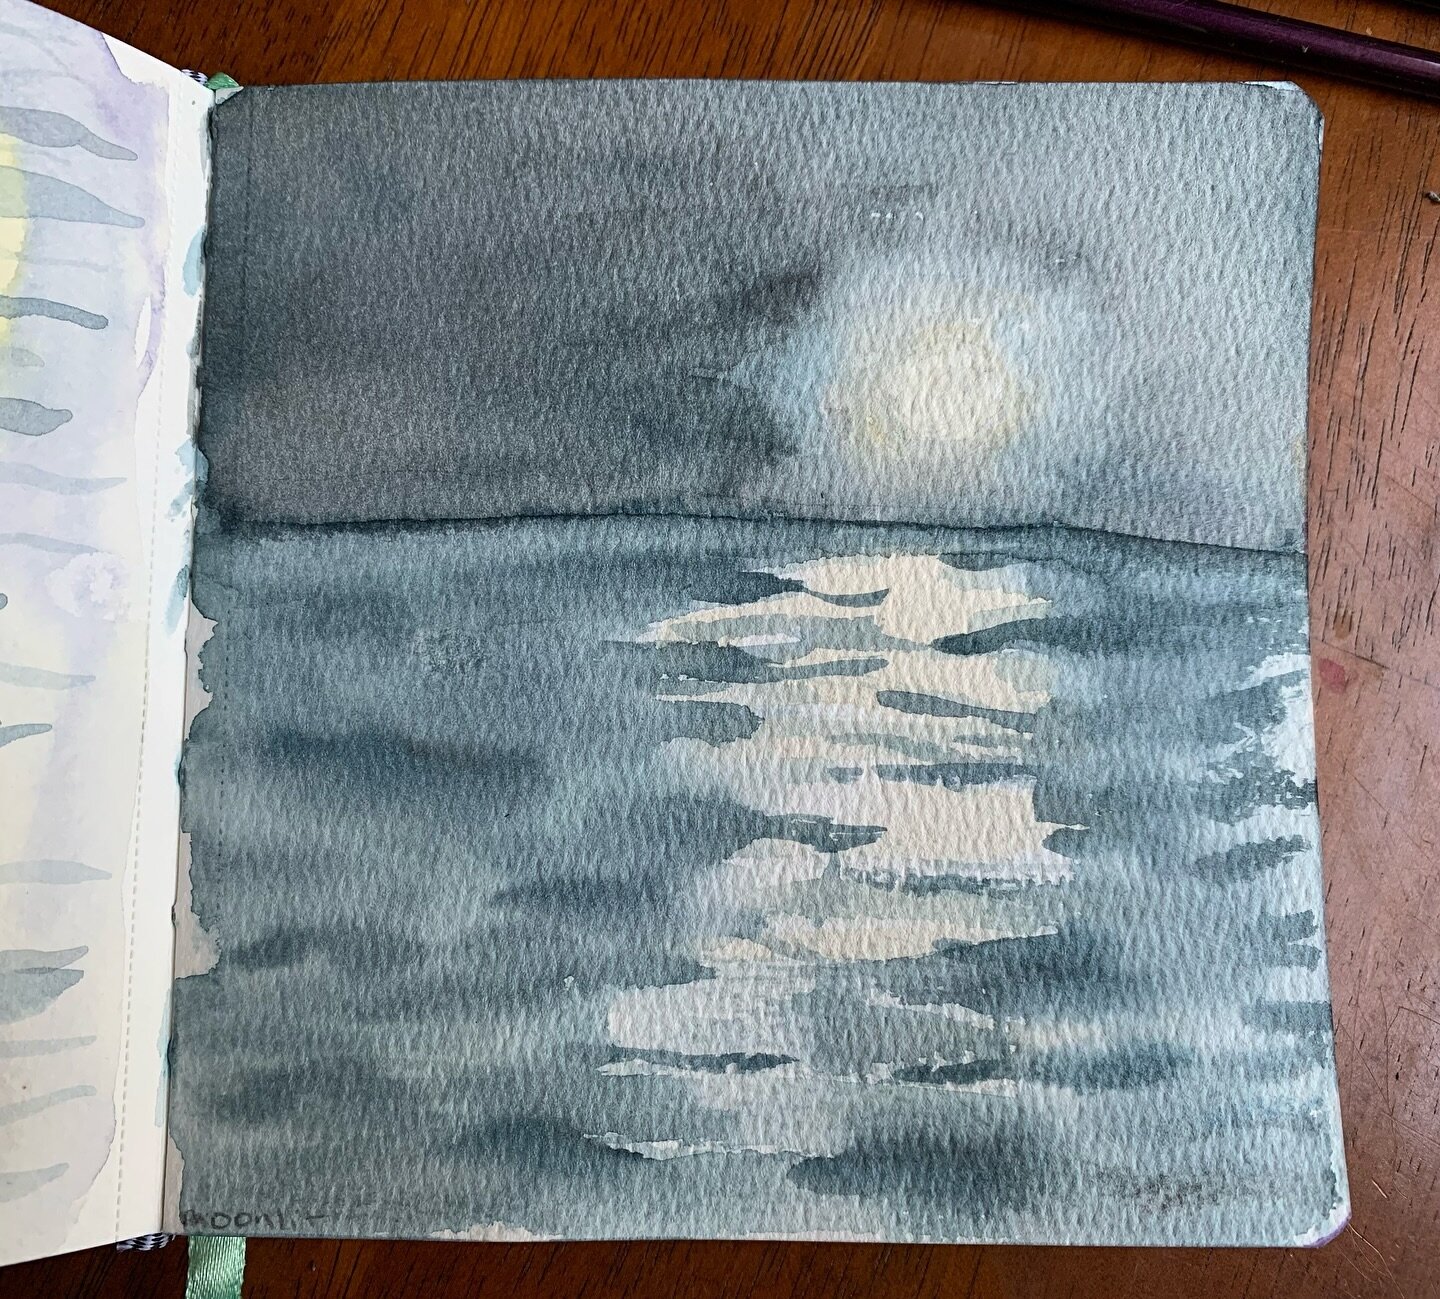 #100daysofwonder2024 20/100 Moonlit. I gave myself a 10 minute time limit on this one. And then of course spent an extra 5 minutes touching it up. 😁